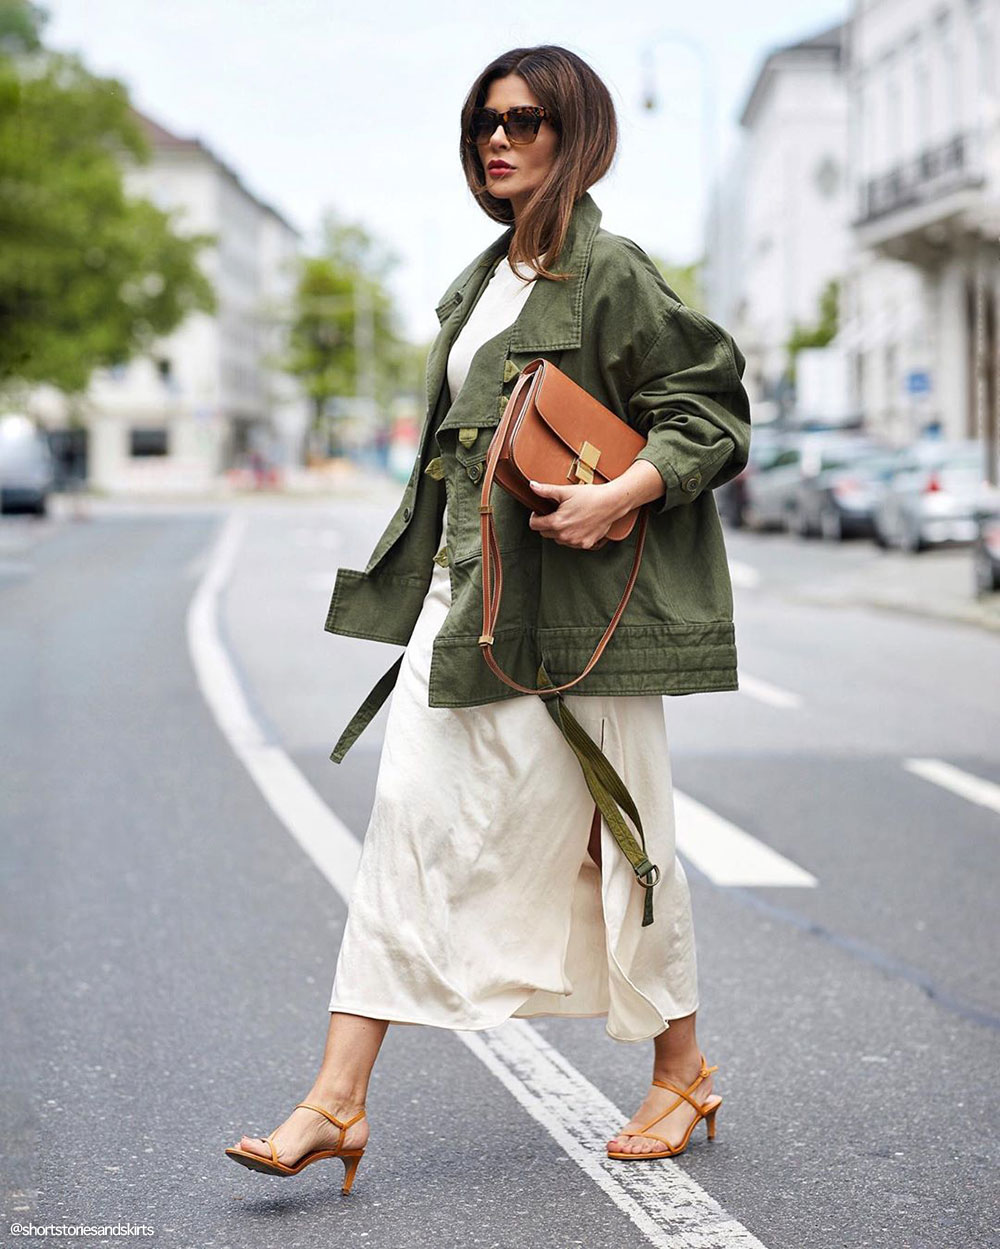 Khaki Jacket 15 Cute Outfit Ideas, What Goes Well With Khaki Trench Coat